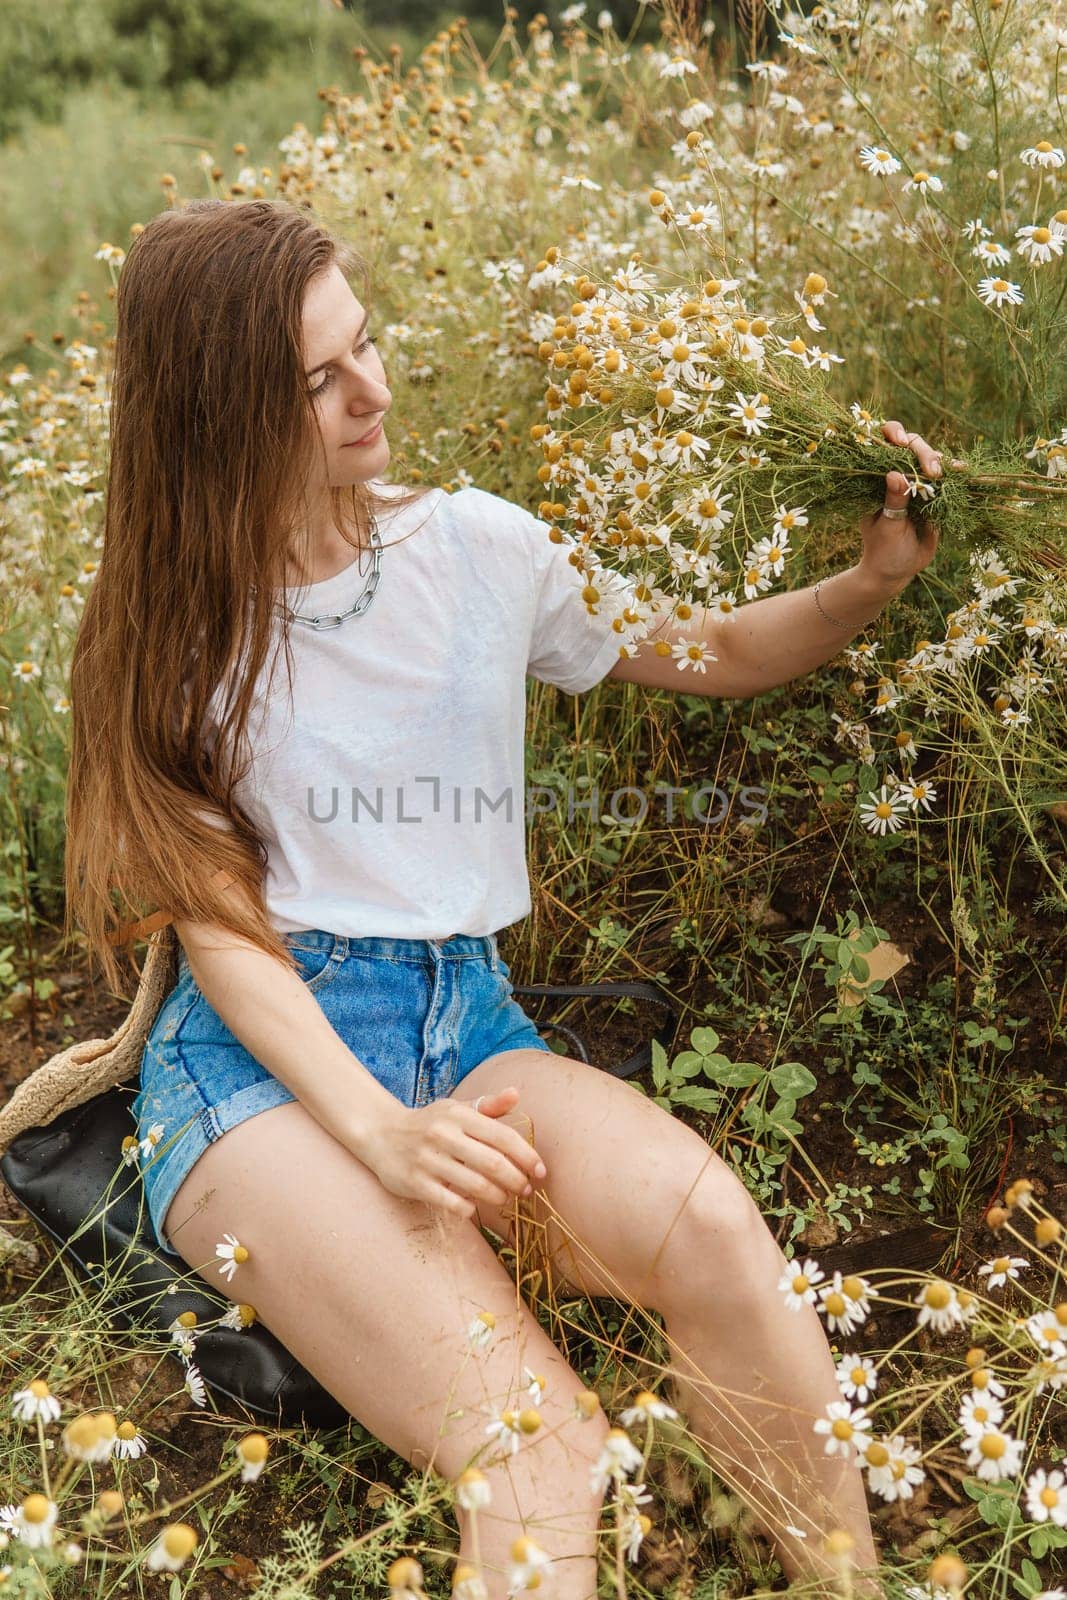 Beautiful young woman in nature with a bouquet of daisies. Field daisies, field of flowers. by Annu1tochka